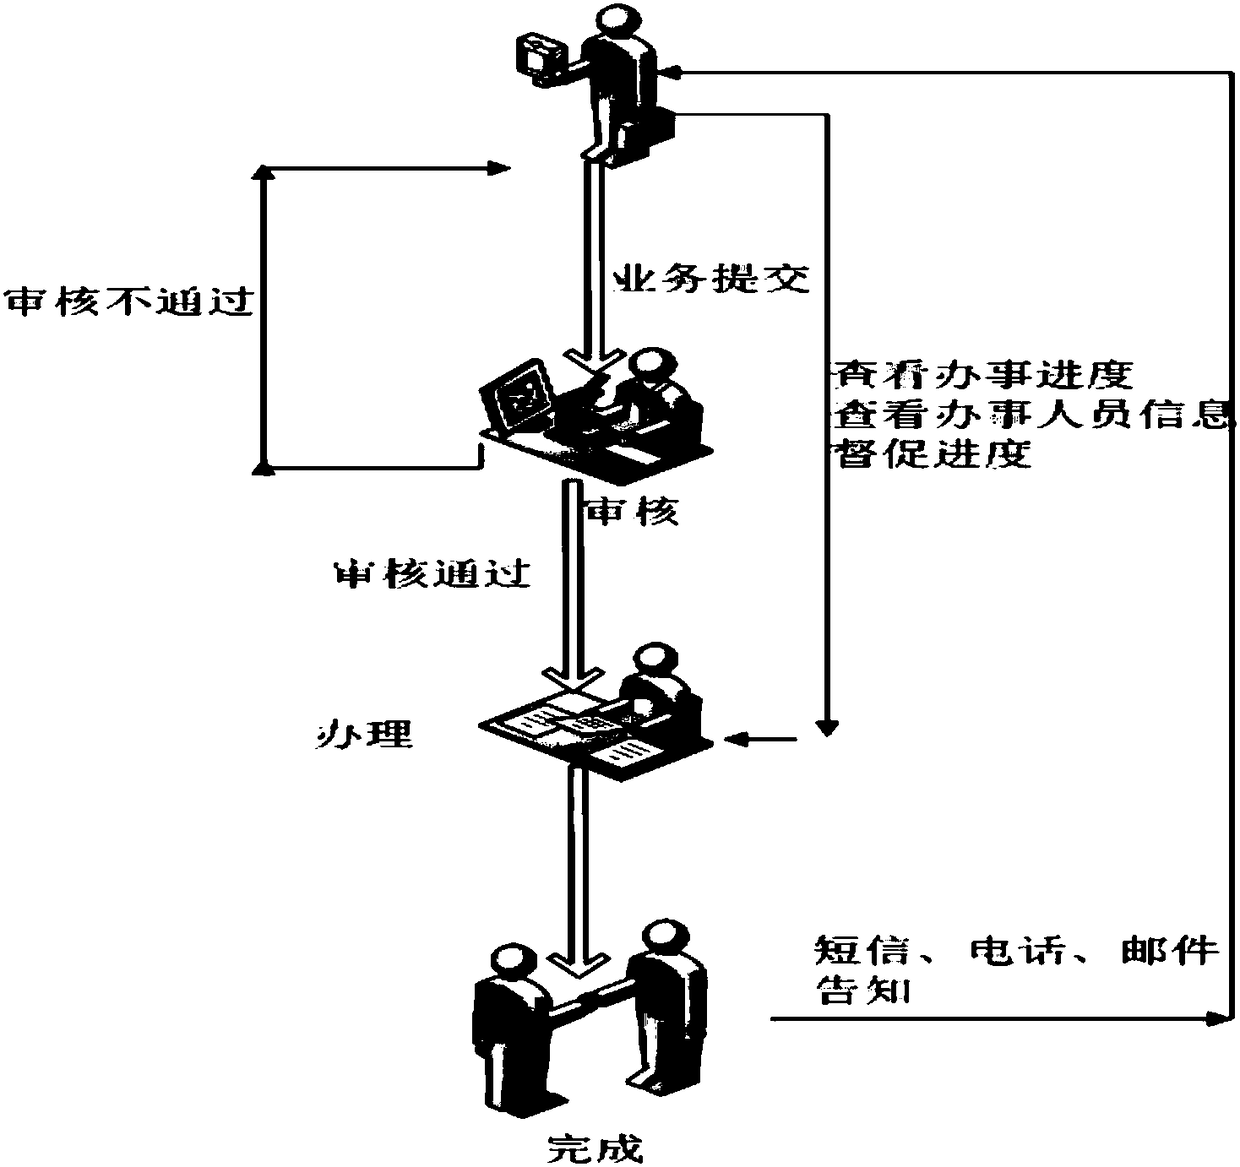 Information service system of one-door administrative service center